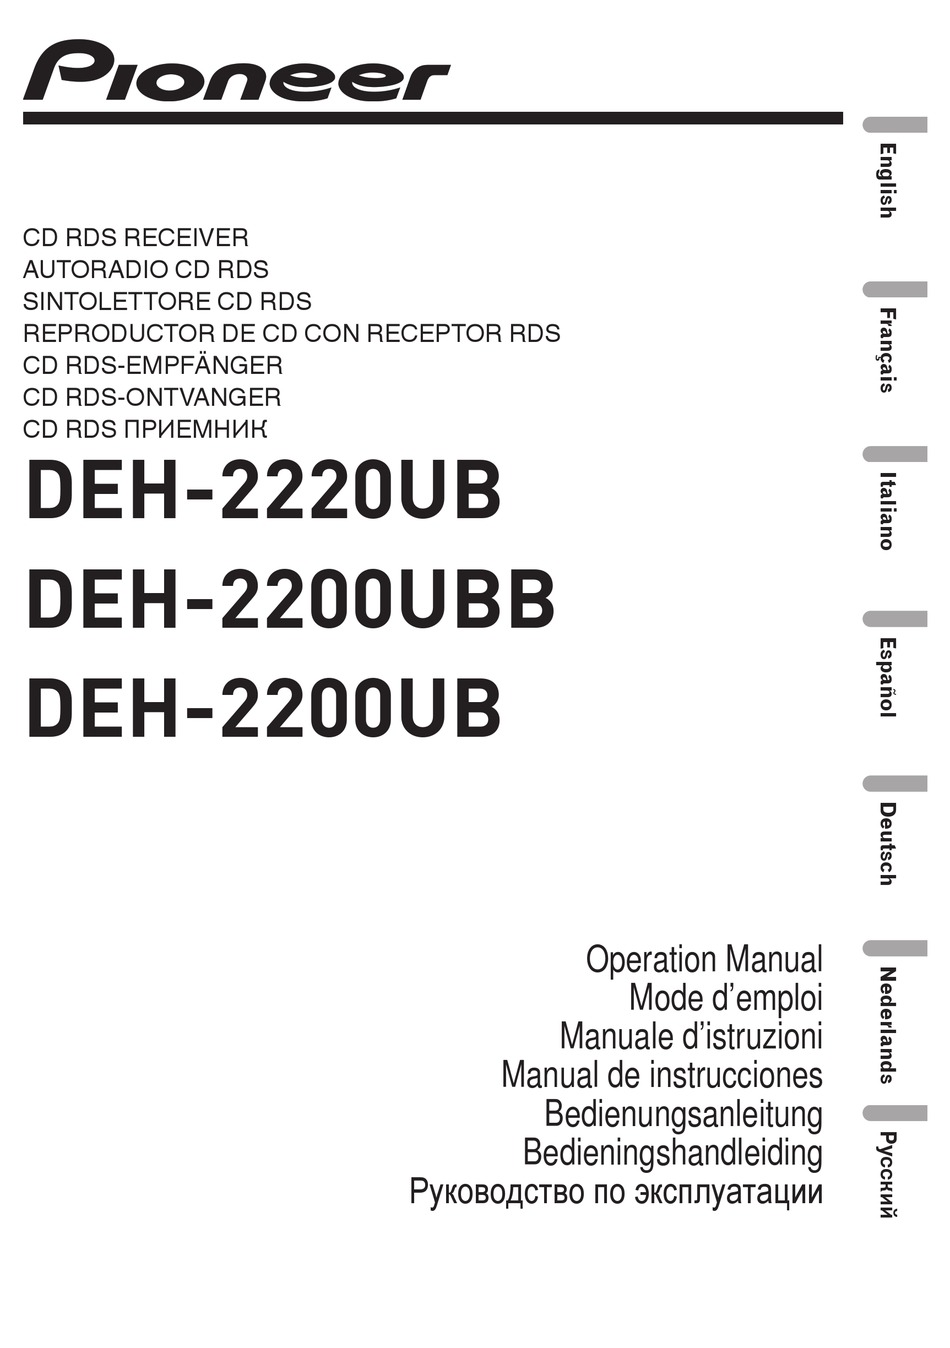 Information; Troubleshooting; Error Messages - Pioneer DEH-2200UB Operation Manual [Page 10] ManualsLib